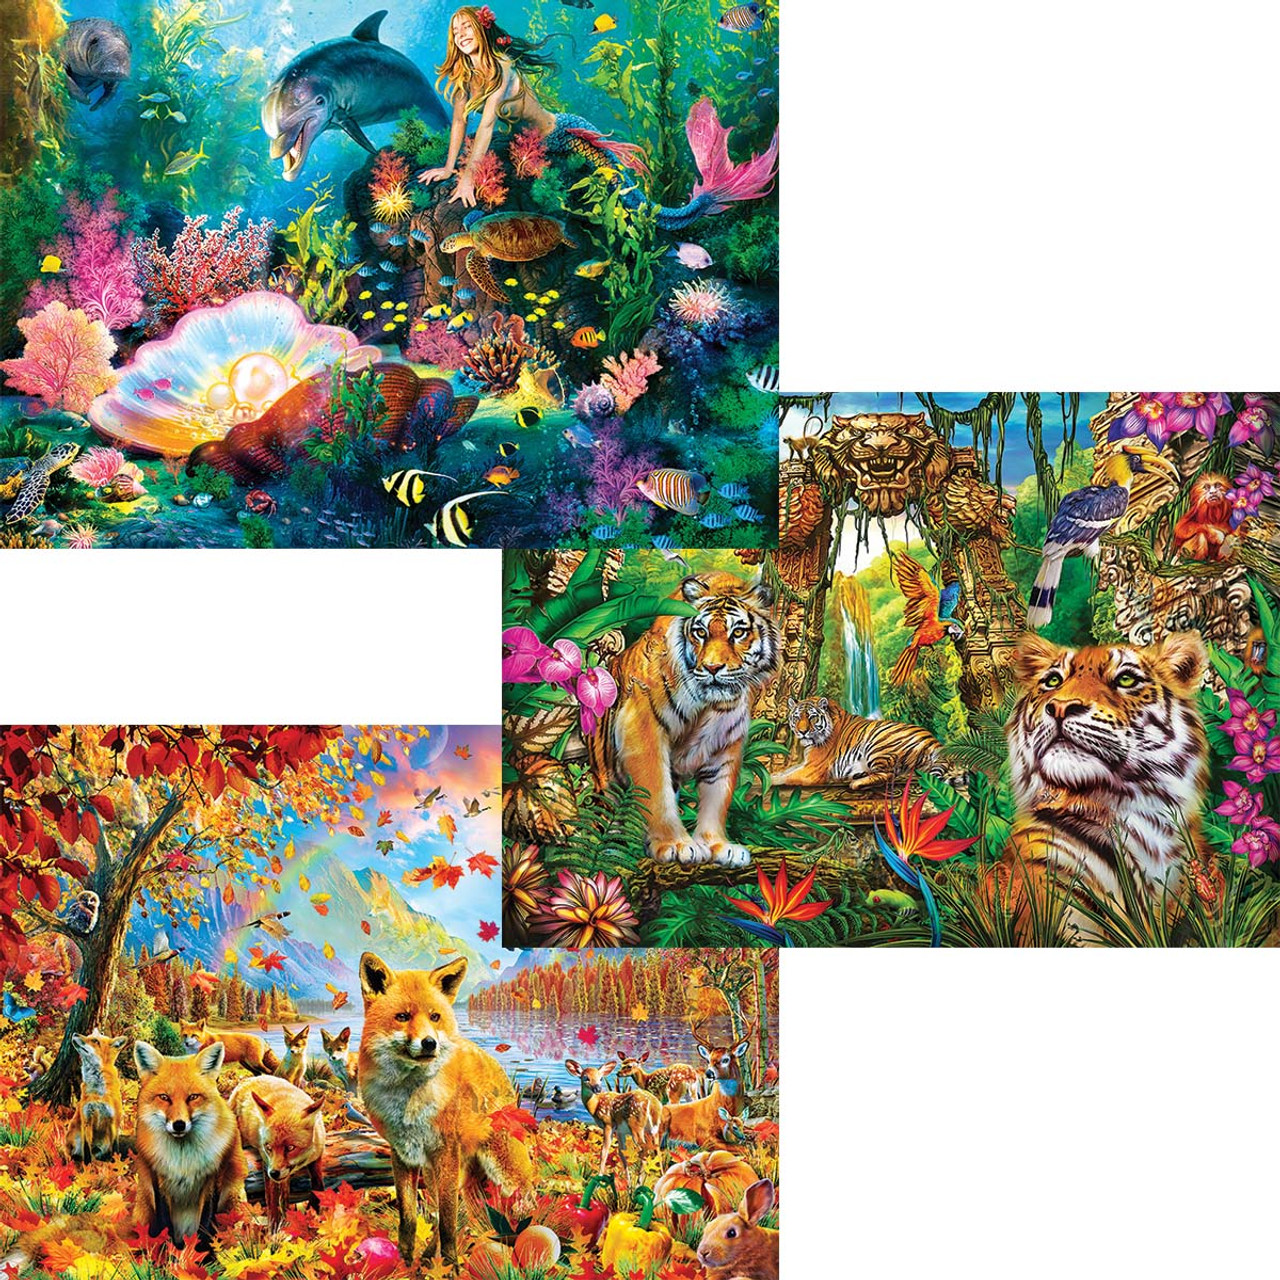 MasterPieces Puzzle Company Jigsaw Puzzle Glue